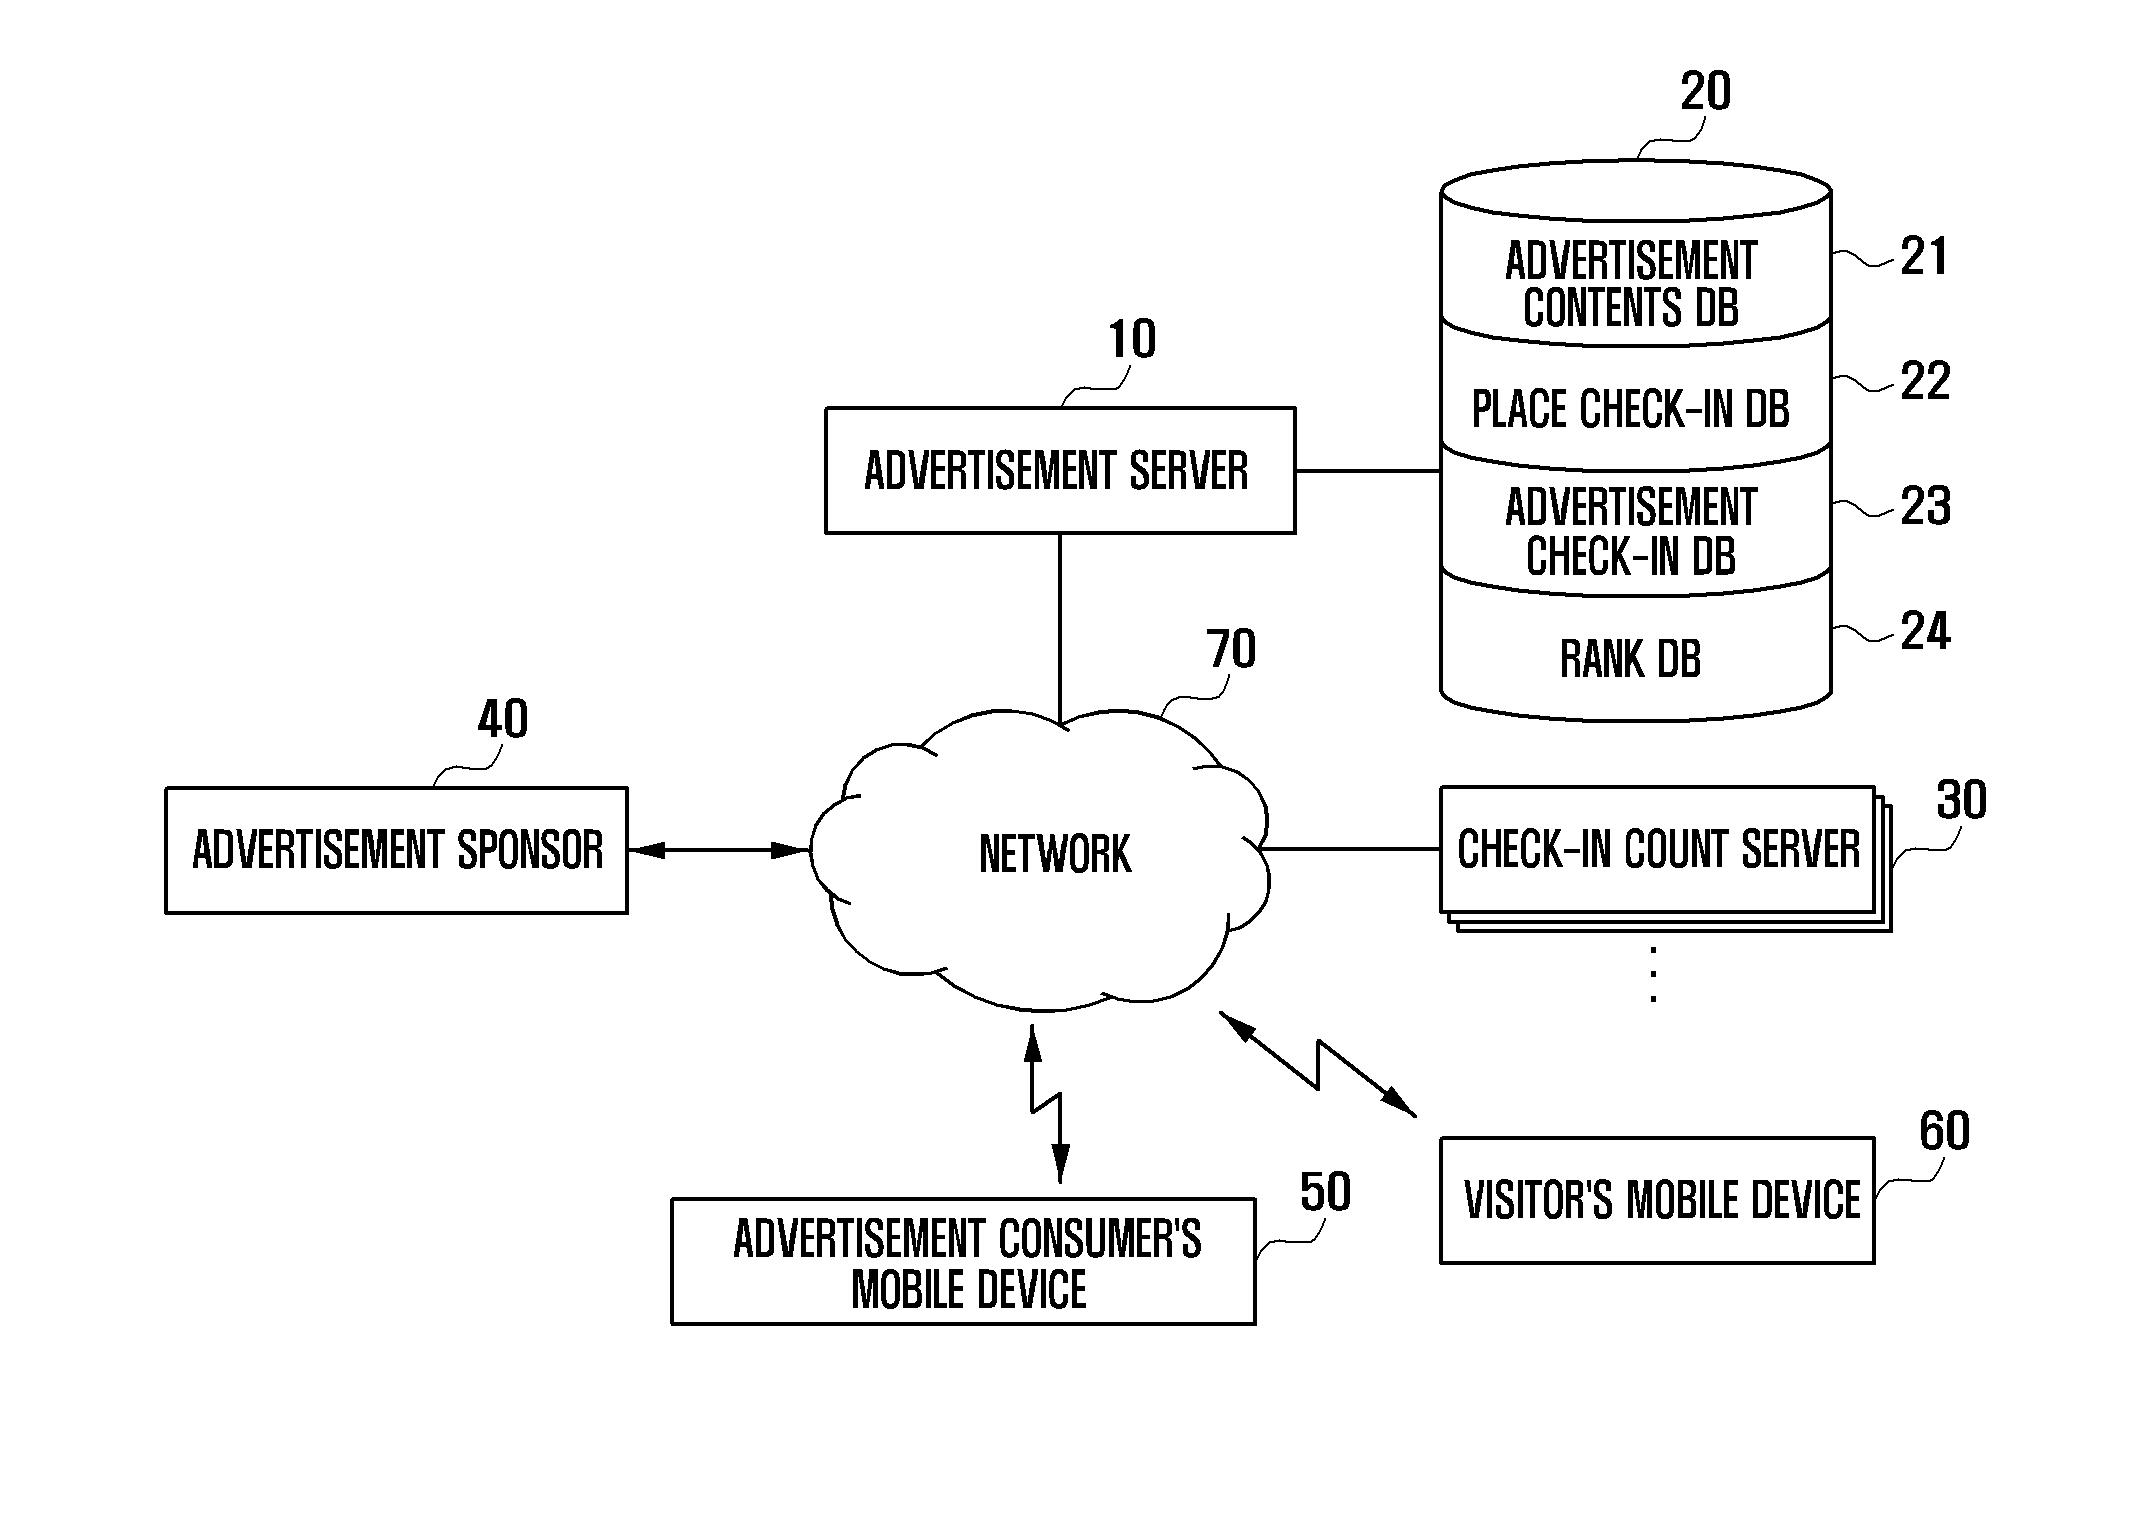 Method and system for providing location-based advertisement contents